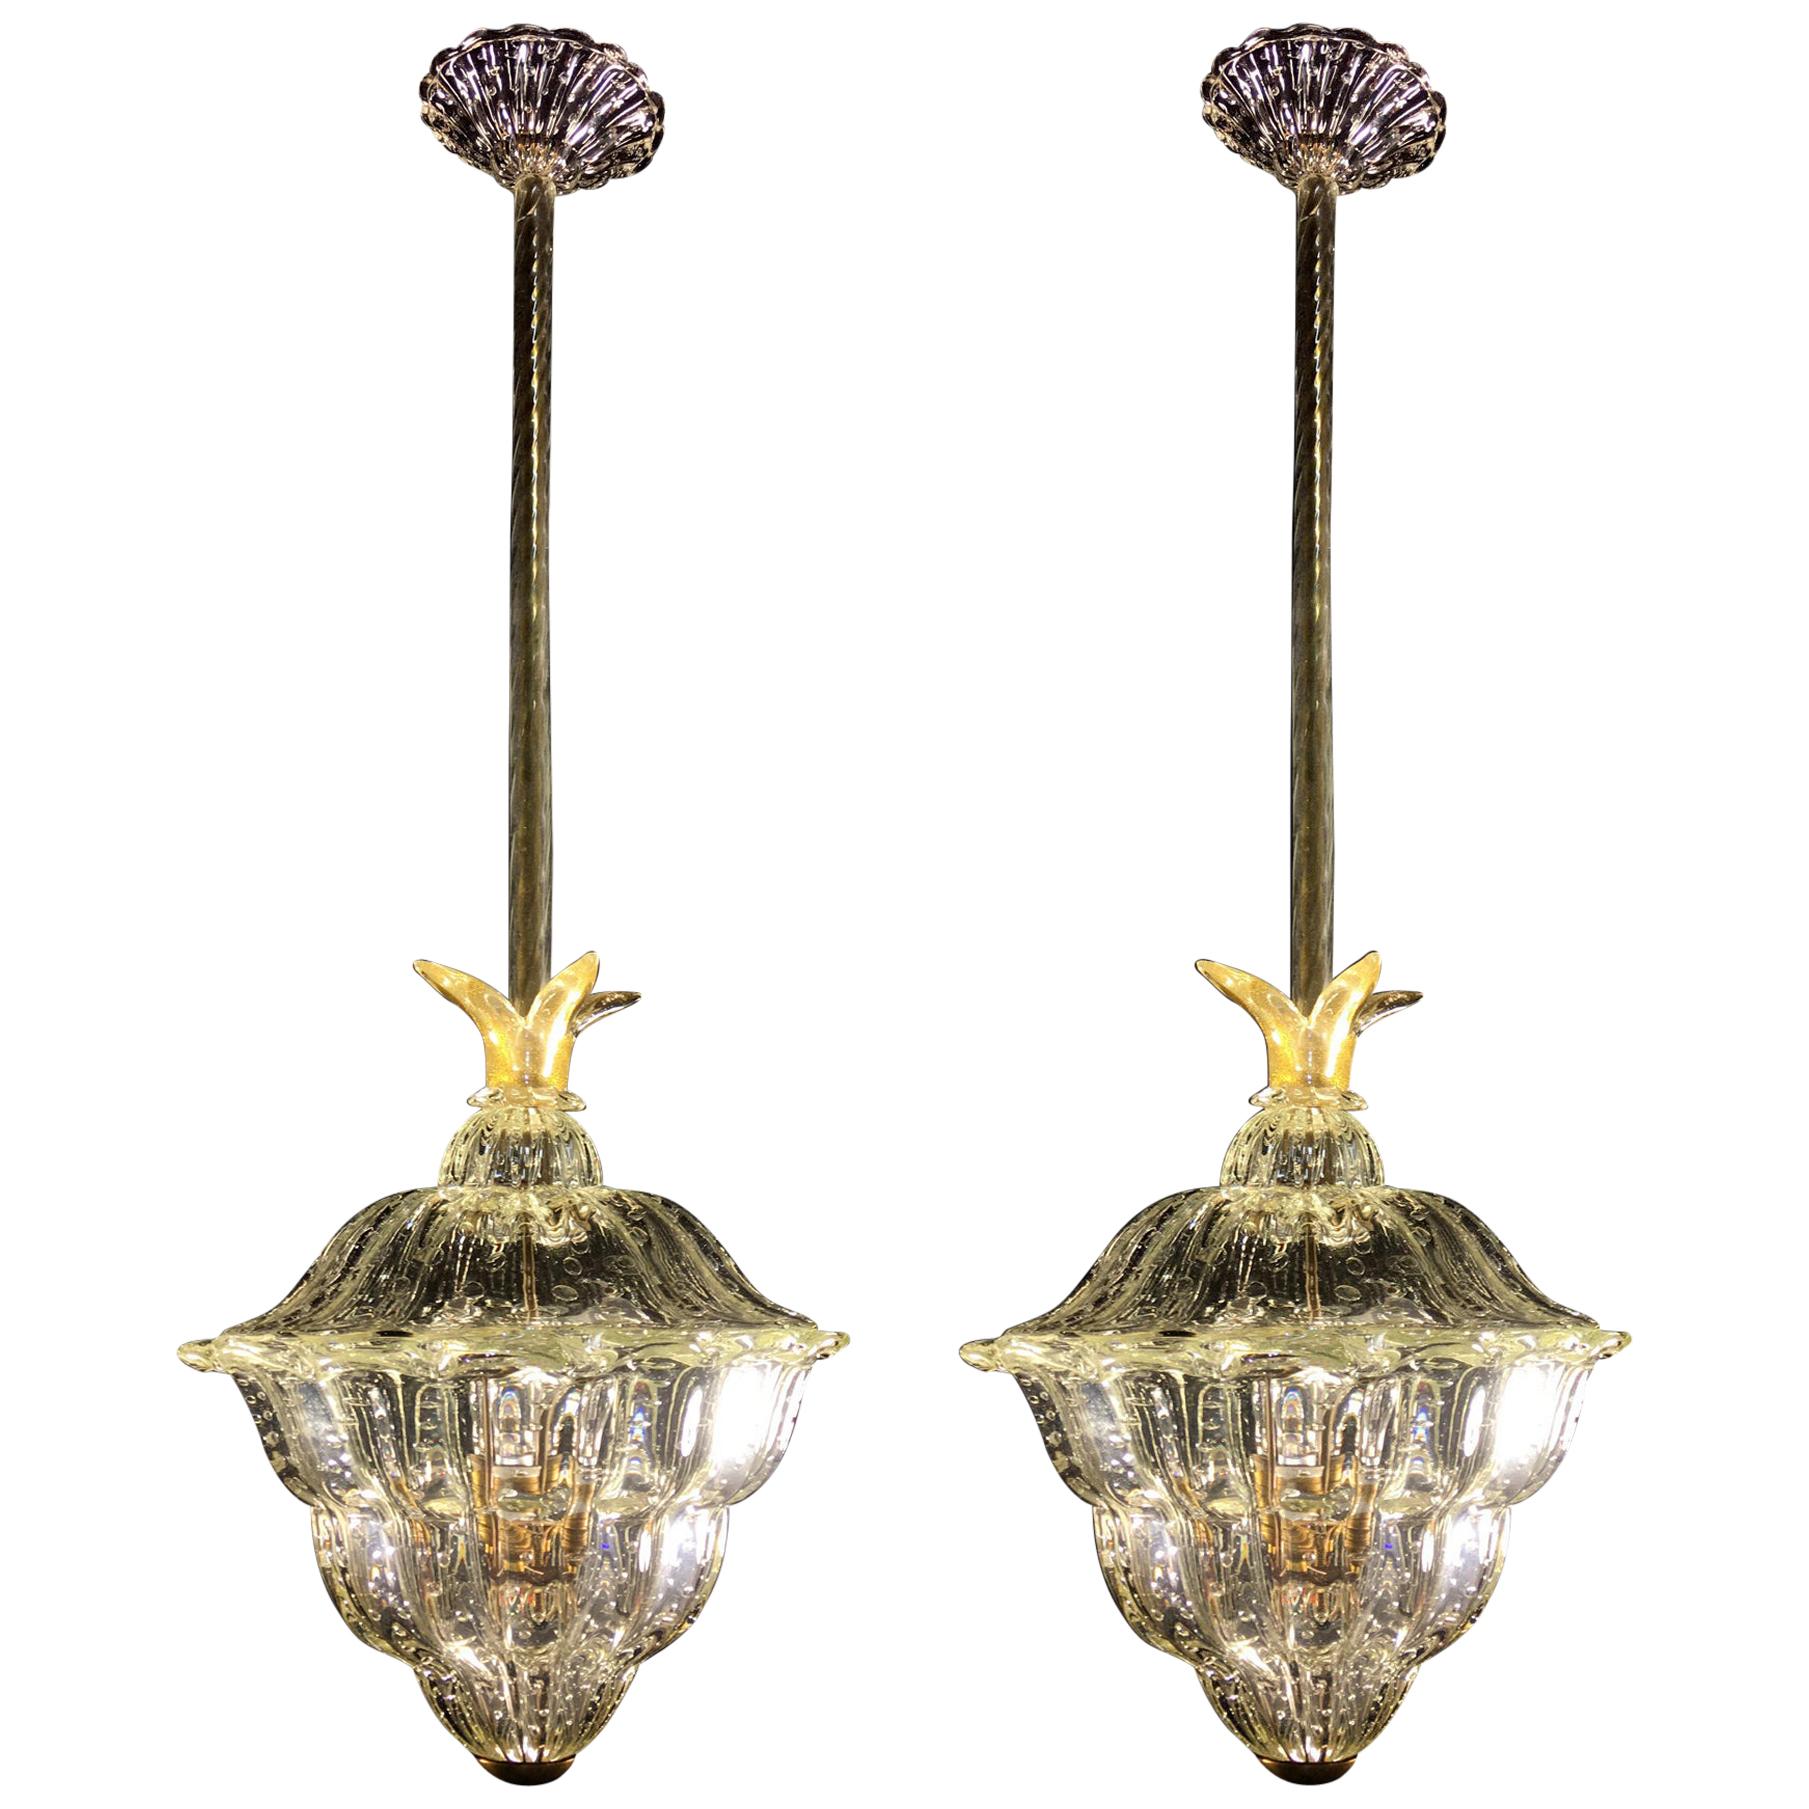 Pair of Chandeliers "The King", Gold Inclusion by Barovier & Toso, Murano, 1940s For Sale